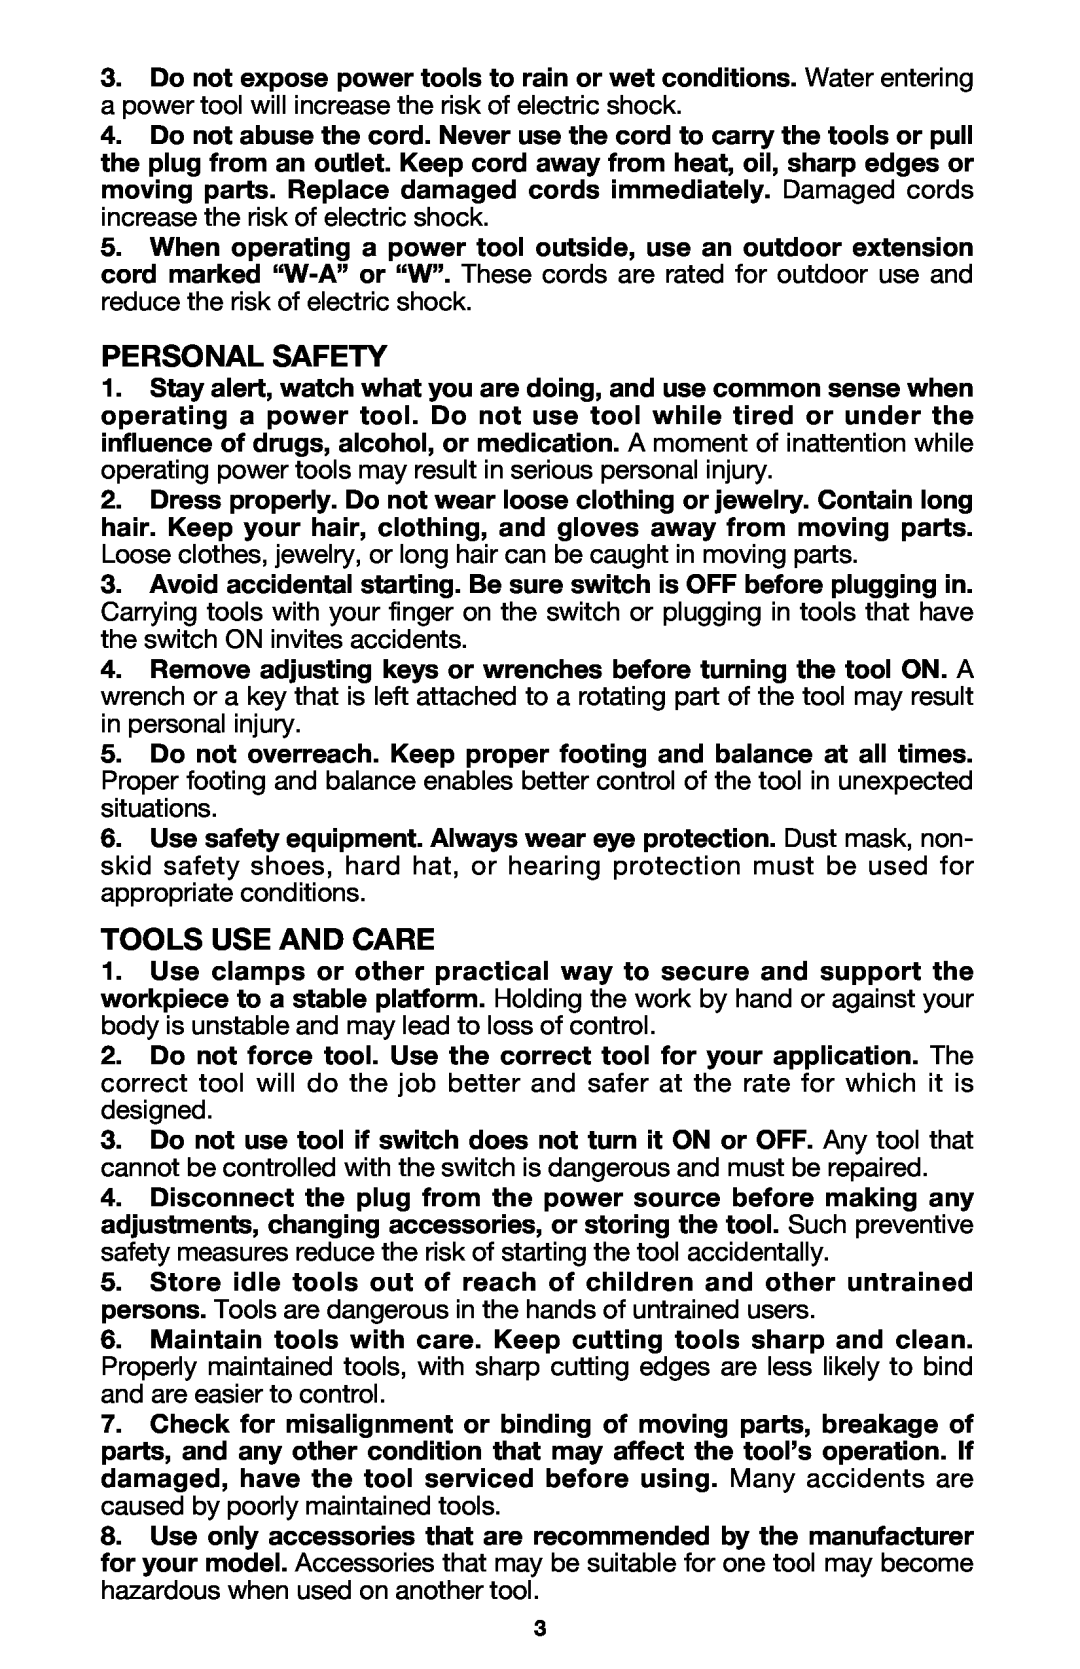 Porter-Cable 424MAG, 423MAG instruction manual Personal Safety, Tools Use And Care 